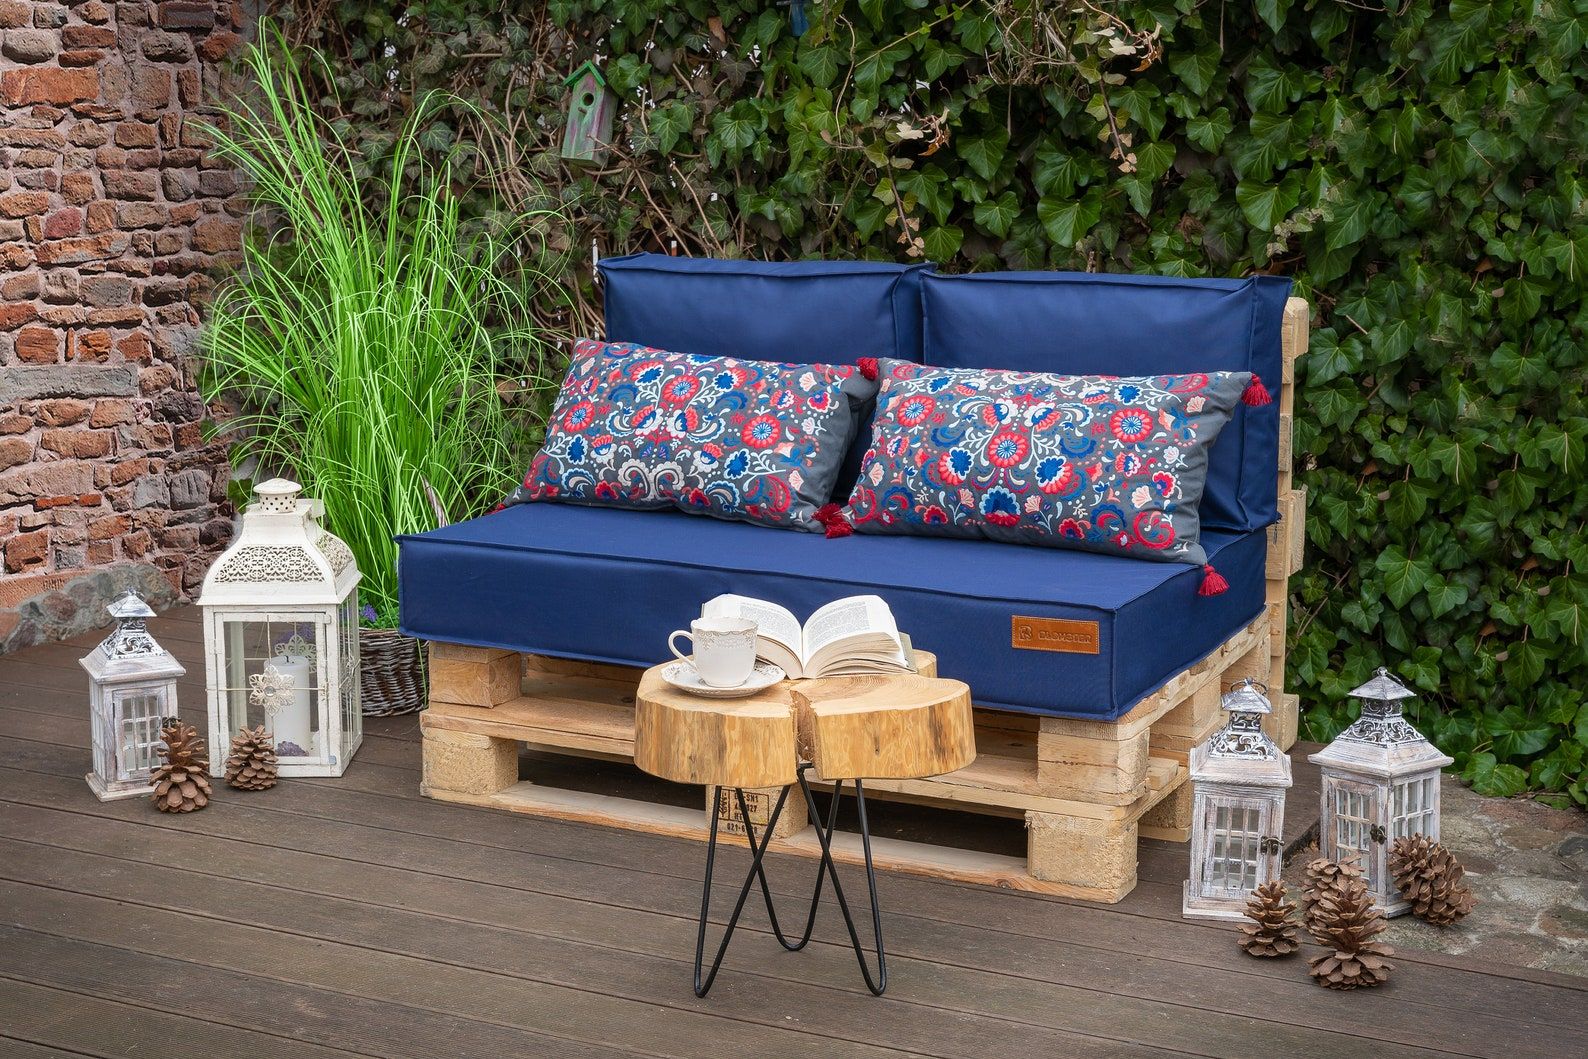 Cushions sofa cushions pallet outdoor garden seat or folder dampproofing 